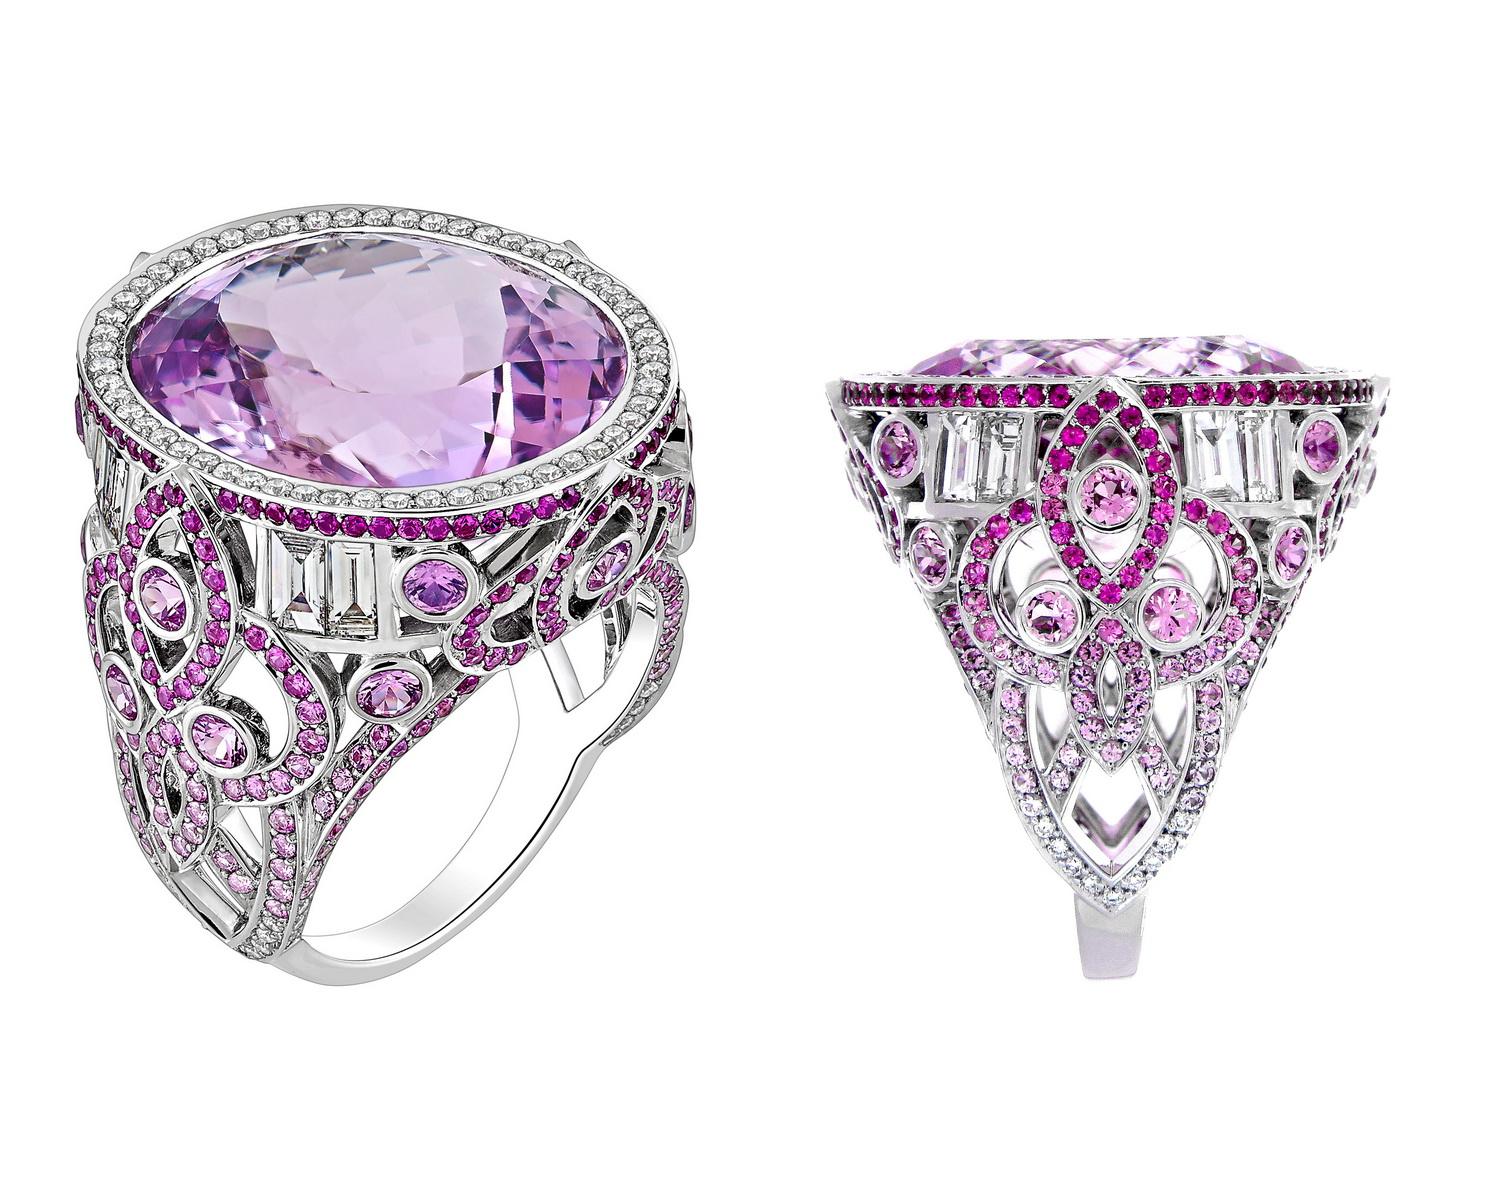 Sweet like a ballerina, this ring showcases an impressive natural 20.40 ct kunzite centre stone. Pink, purple and white are the tones for this ring. Set in 18k white gold, the ring fades from dark to light coloured sapphires and diamonds in a